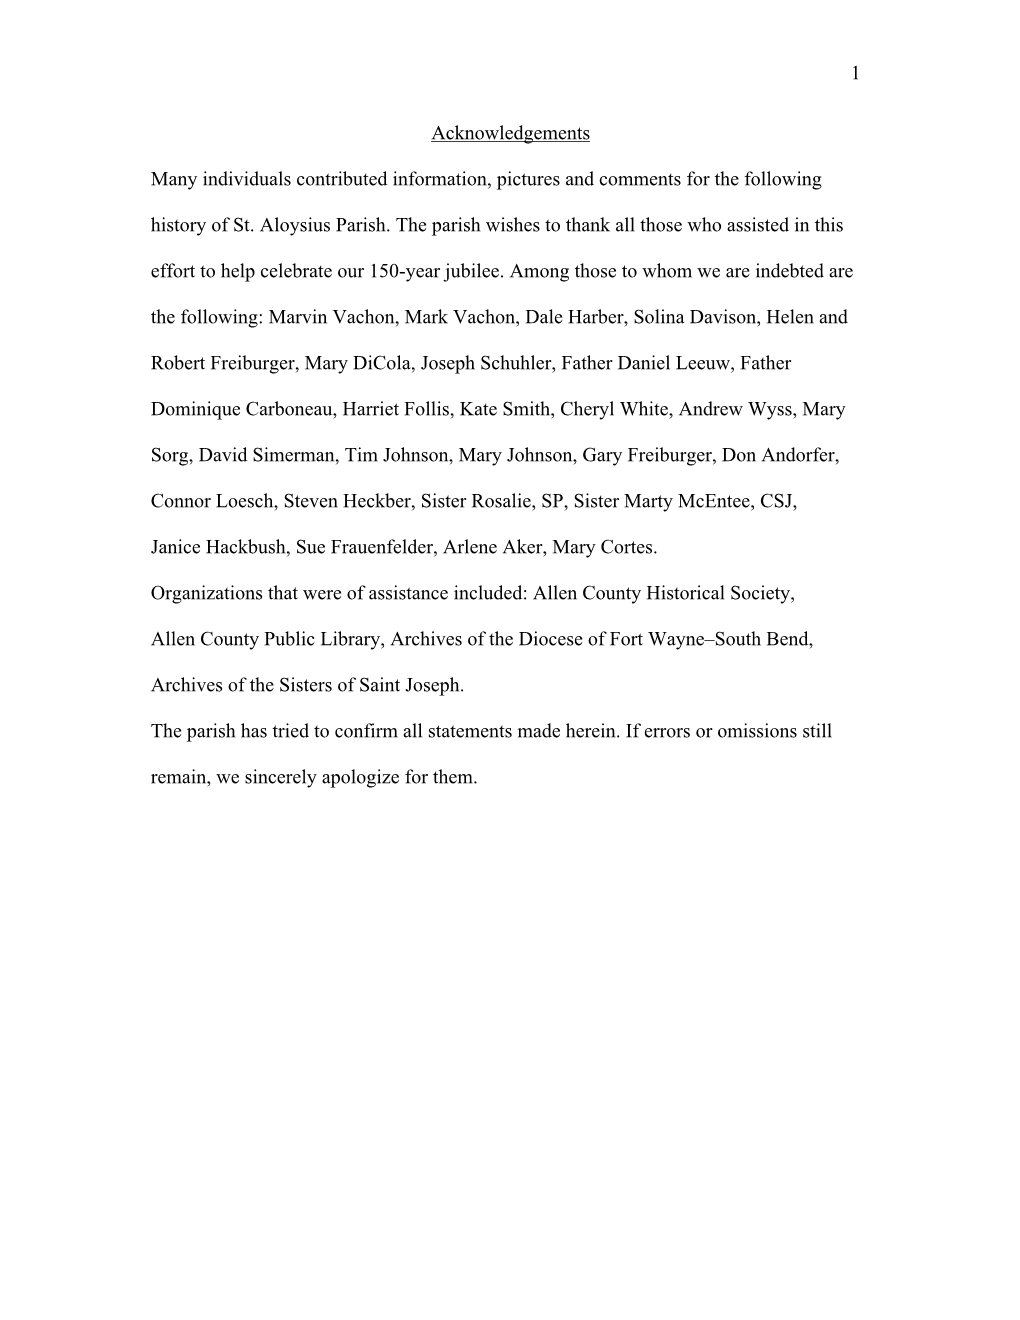 1 Acknowledgements Many Individuals Contributed Information